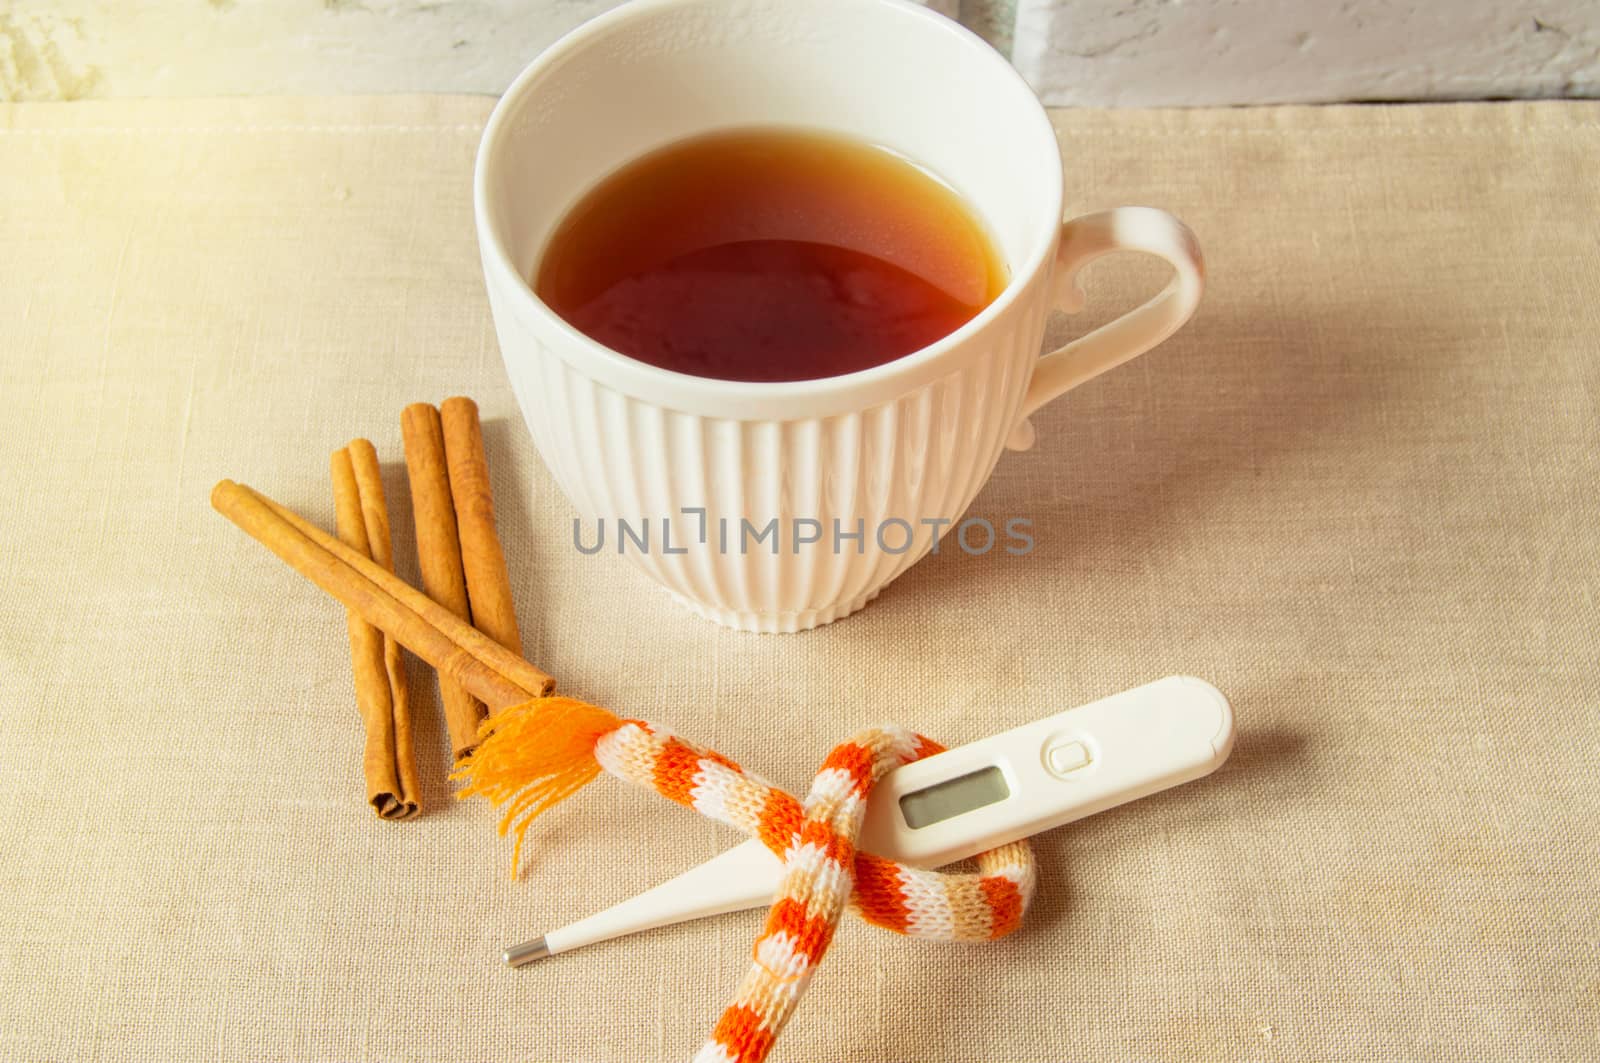 Concept of treating colds - hot tea with cinnamon, thermometer and scarf.